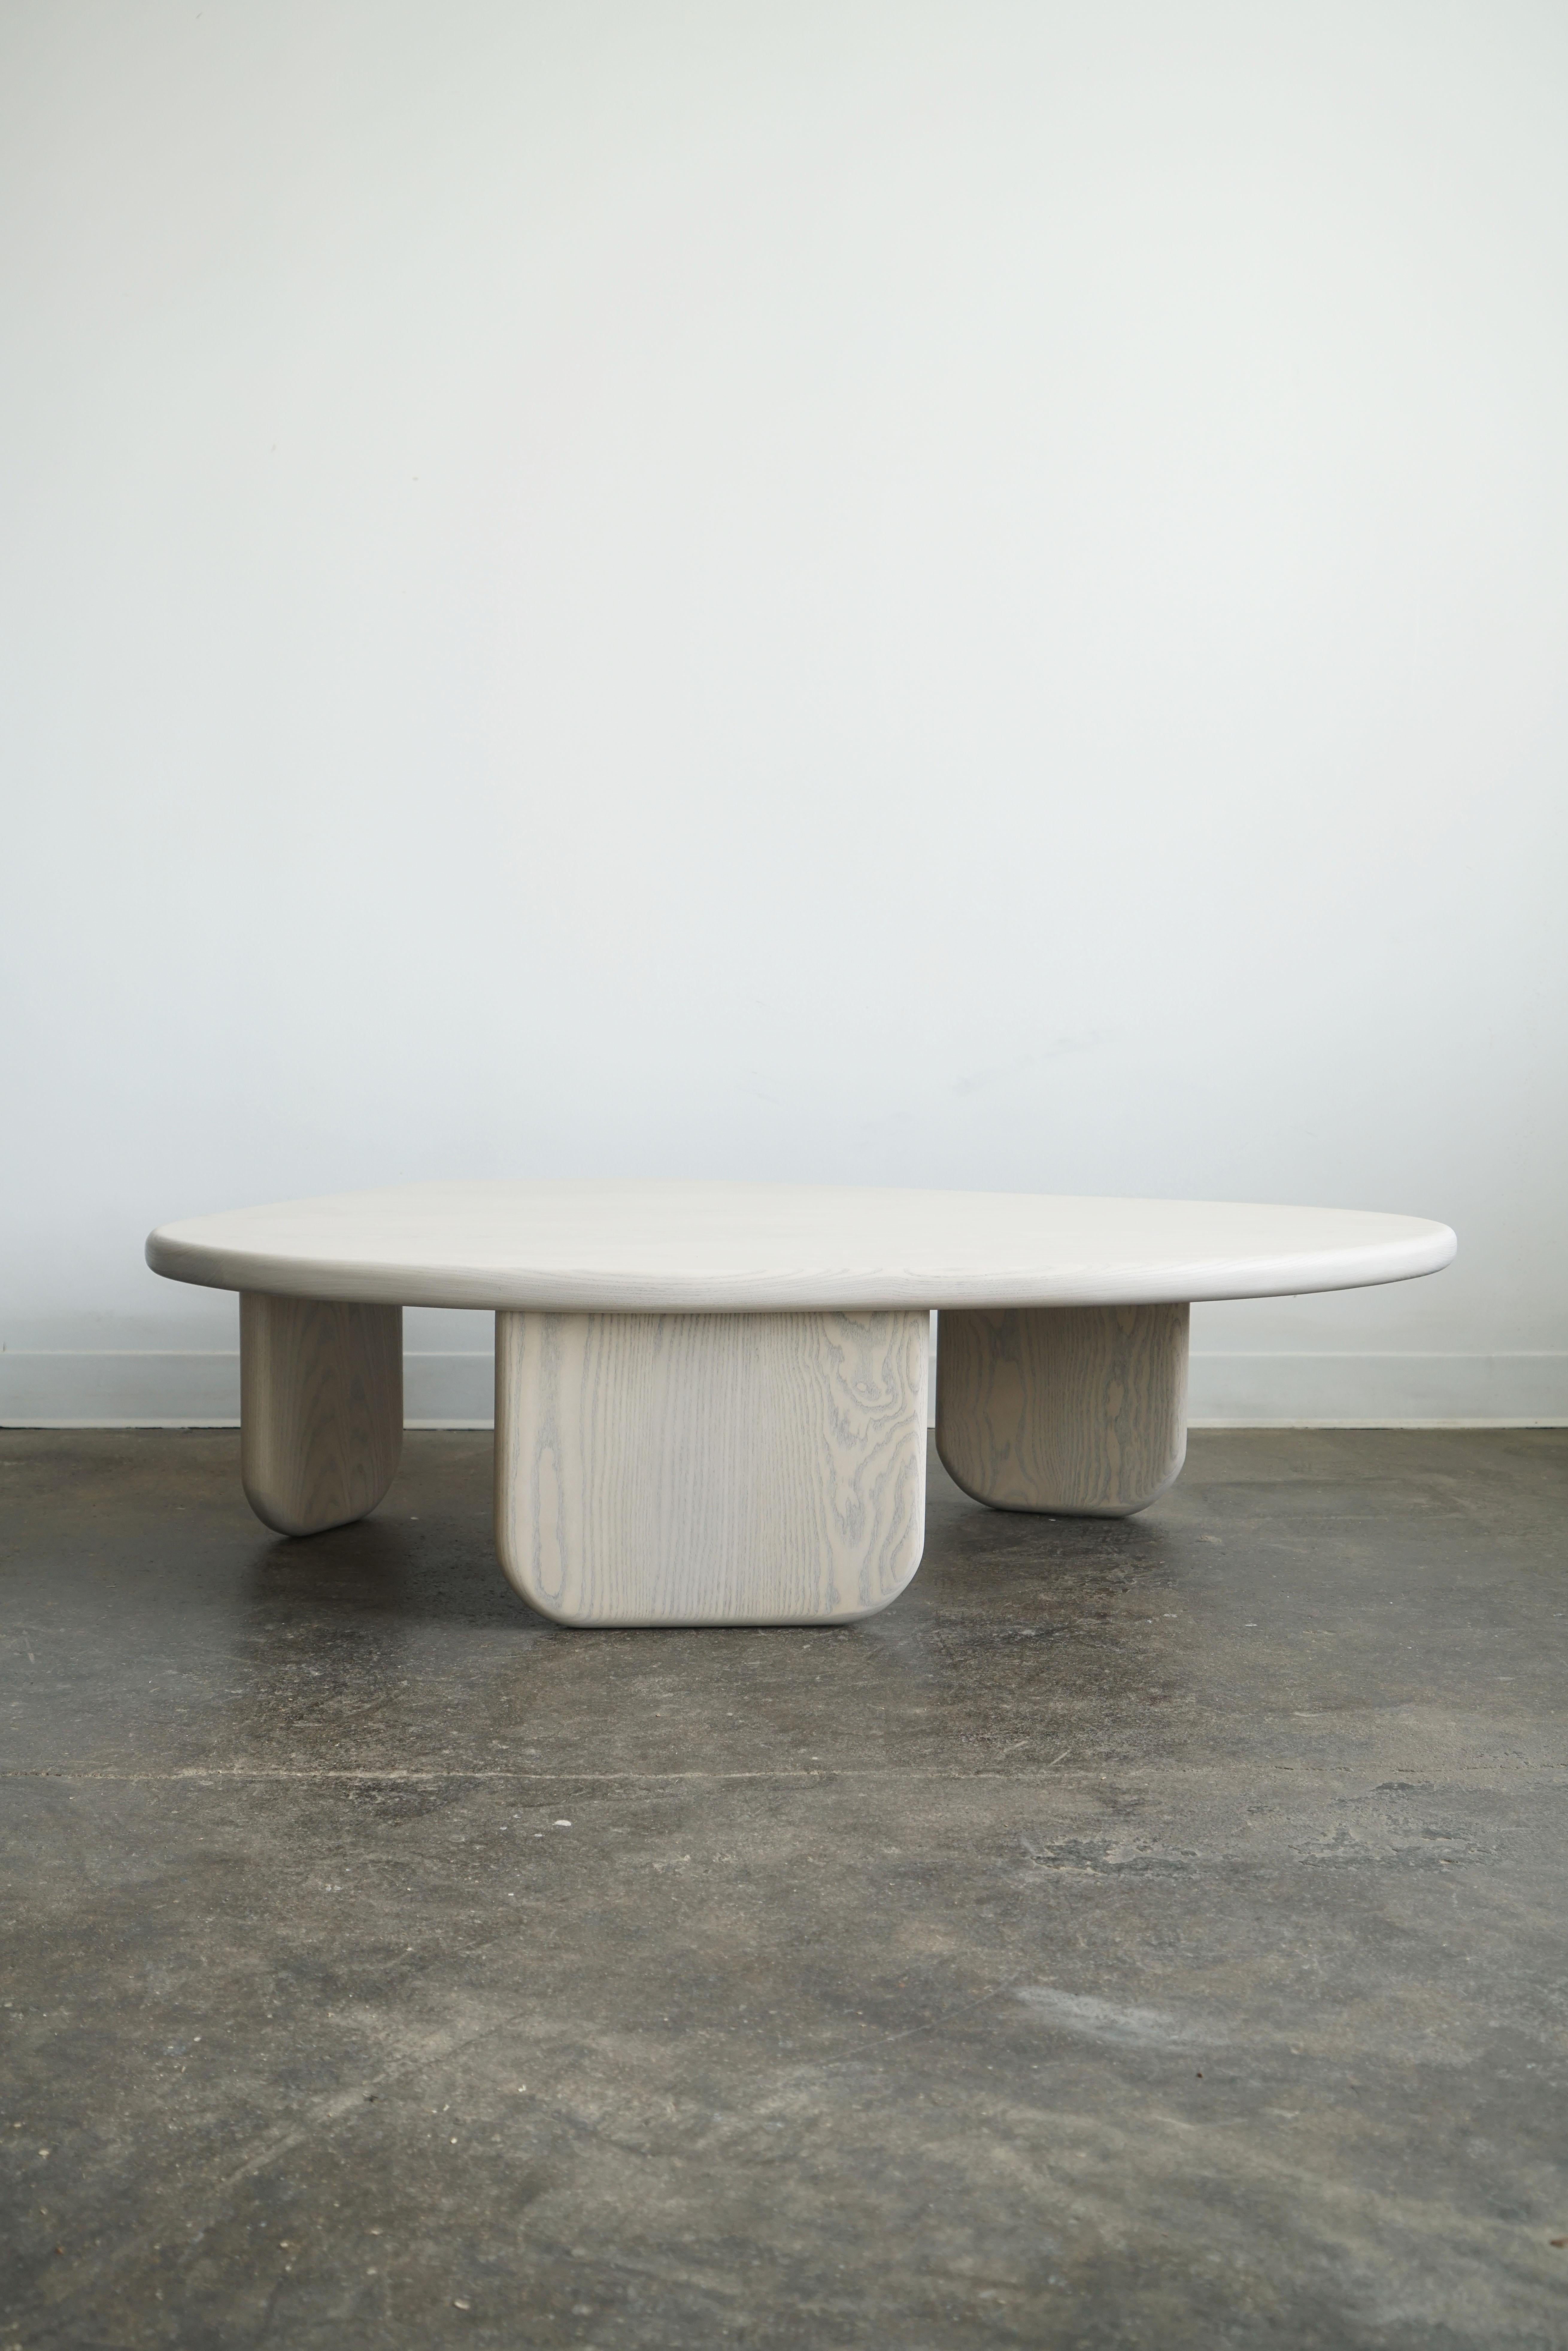 Organic shaped coffee table by Last Workshop, 2023
In 